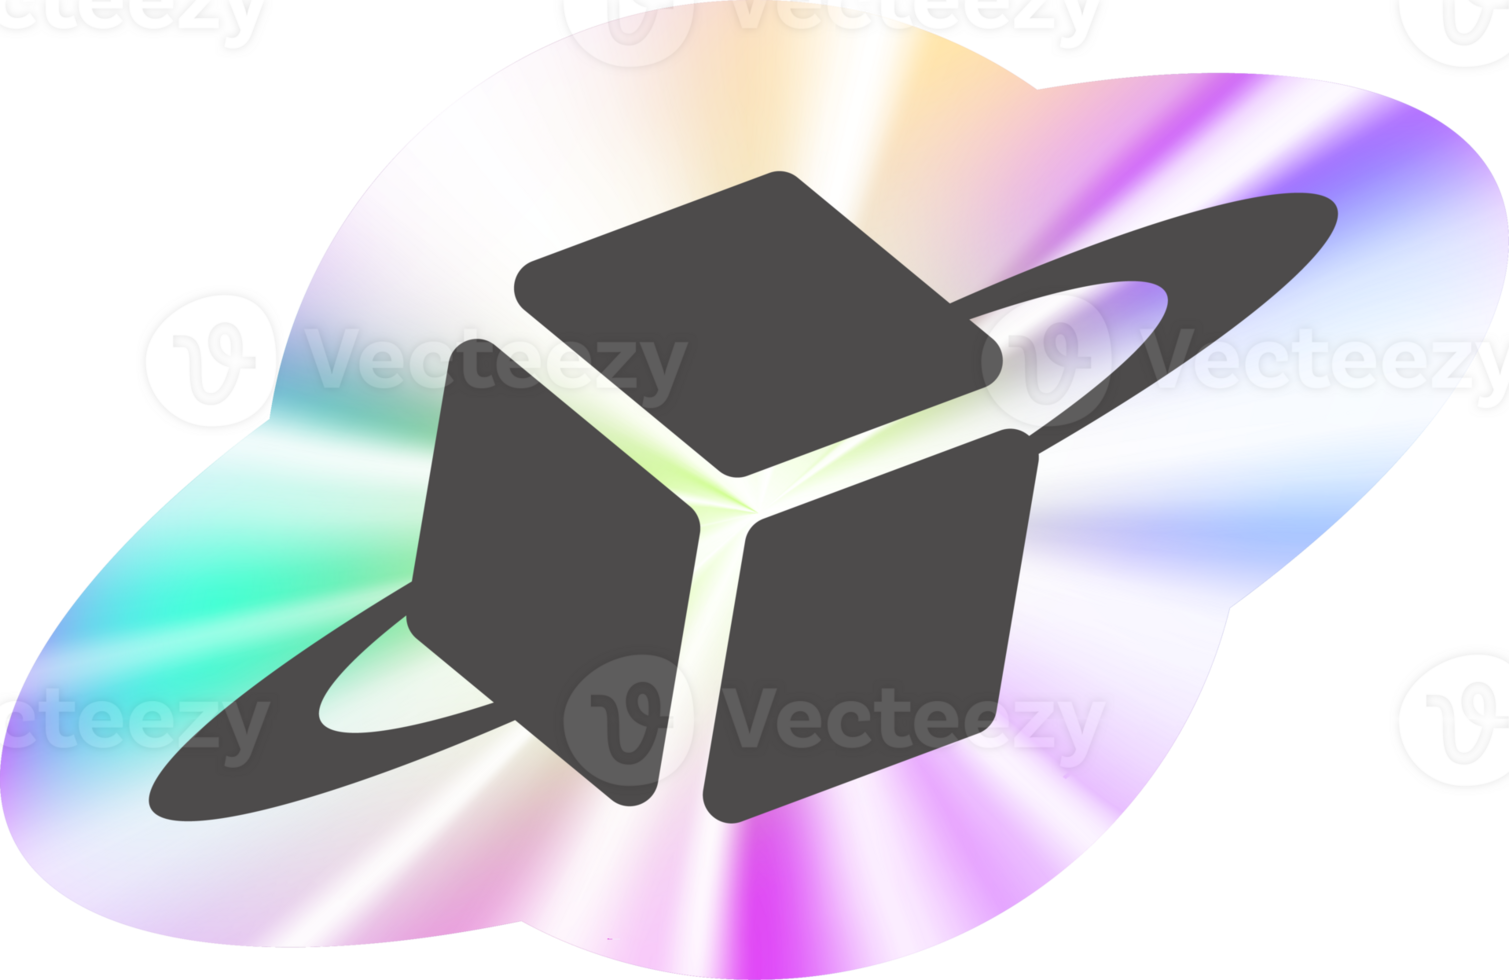 Y2k holographic sticker Cosmic orbit cube png